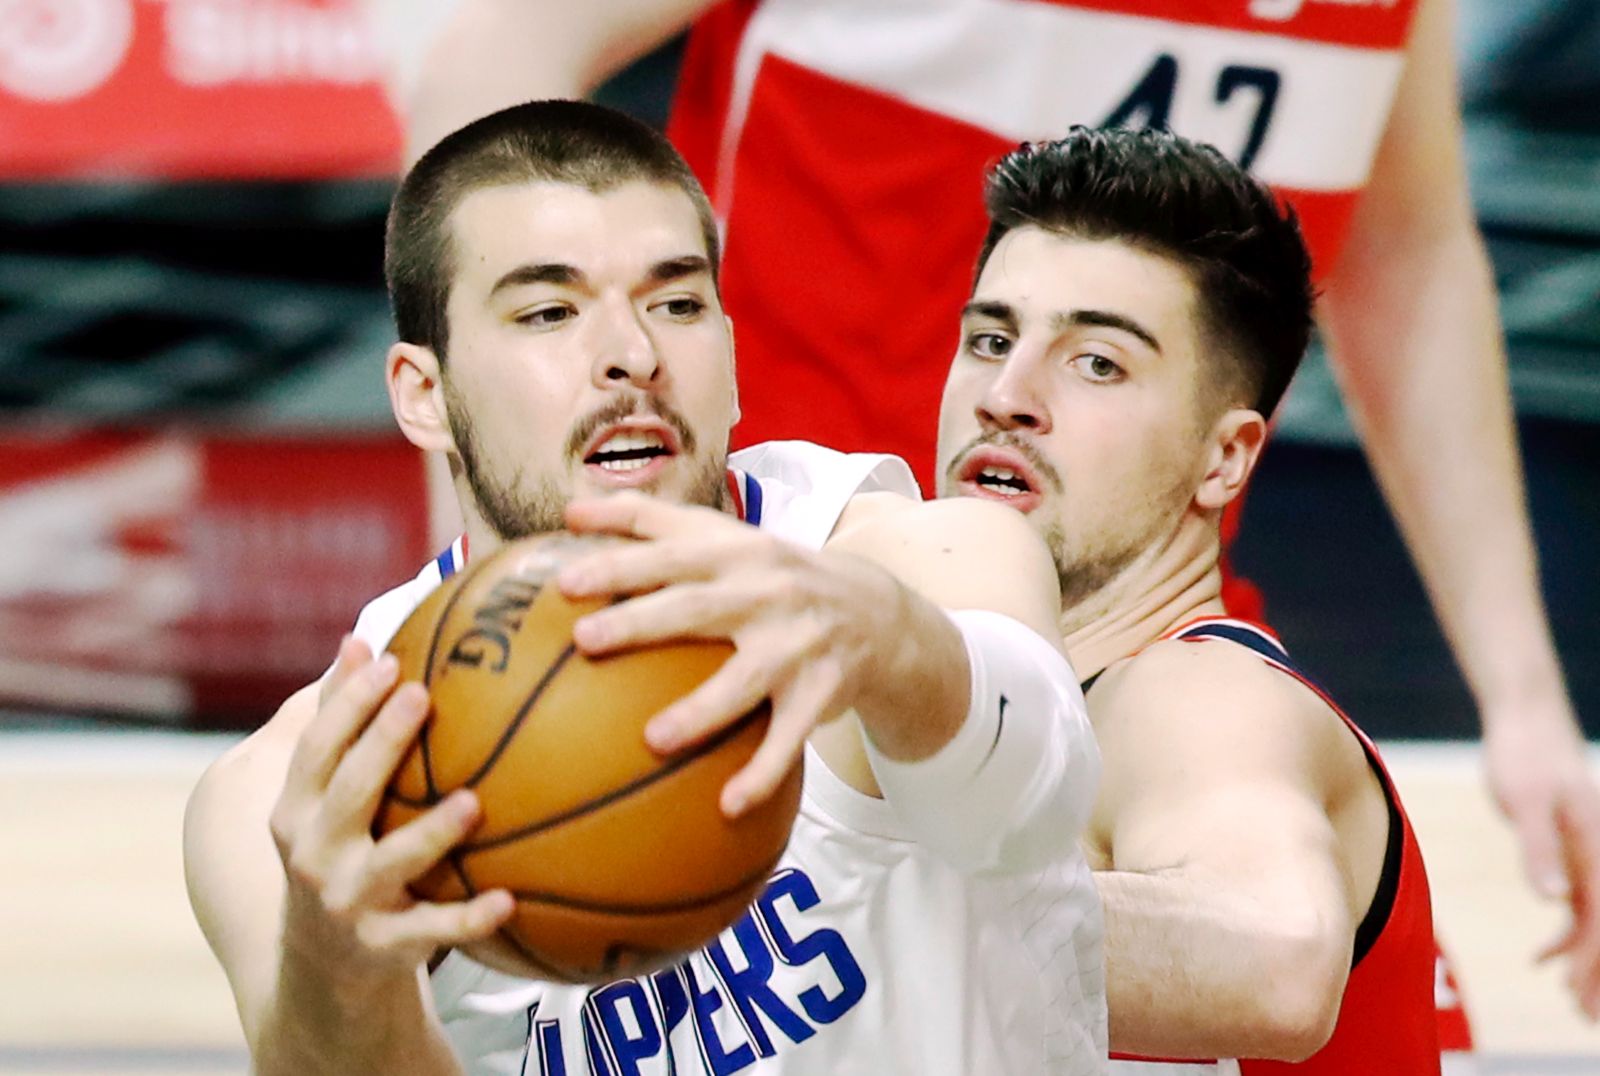 epa09033017 Los Angeles Clippers center Ivica Zubac (L) in action against Washington Wizards guard Raul Neto (R) during the first quarter of the NBA basketball game between the Washington Wizards and the Los Angeles Clippers at the Staples Center in Los Angeles, California, USA, 23 February 2021.  EPA/ETIENNE LAURENT SHUTTERSTOCK OUT